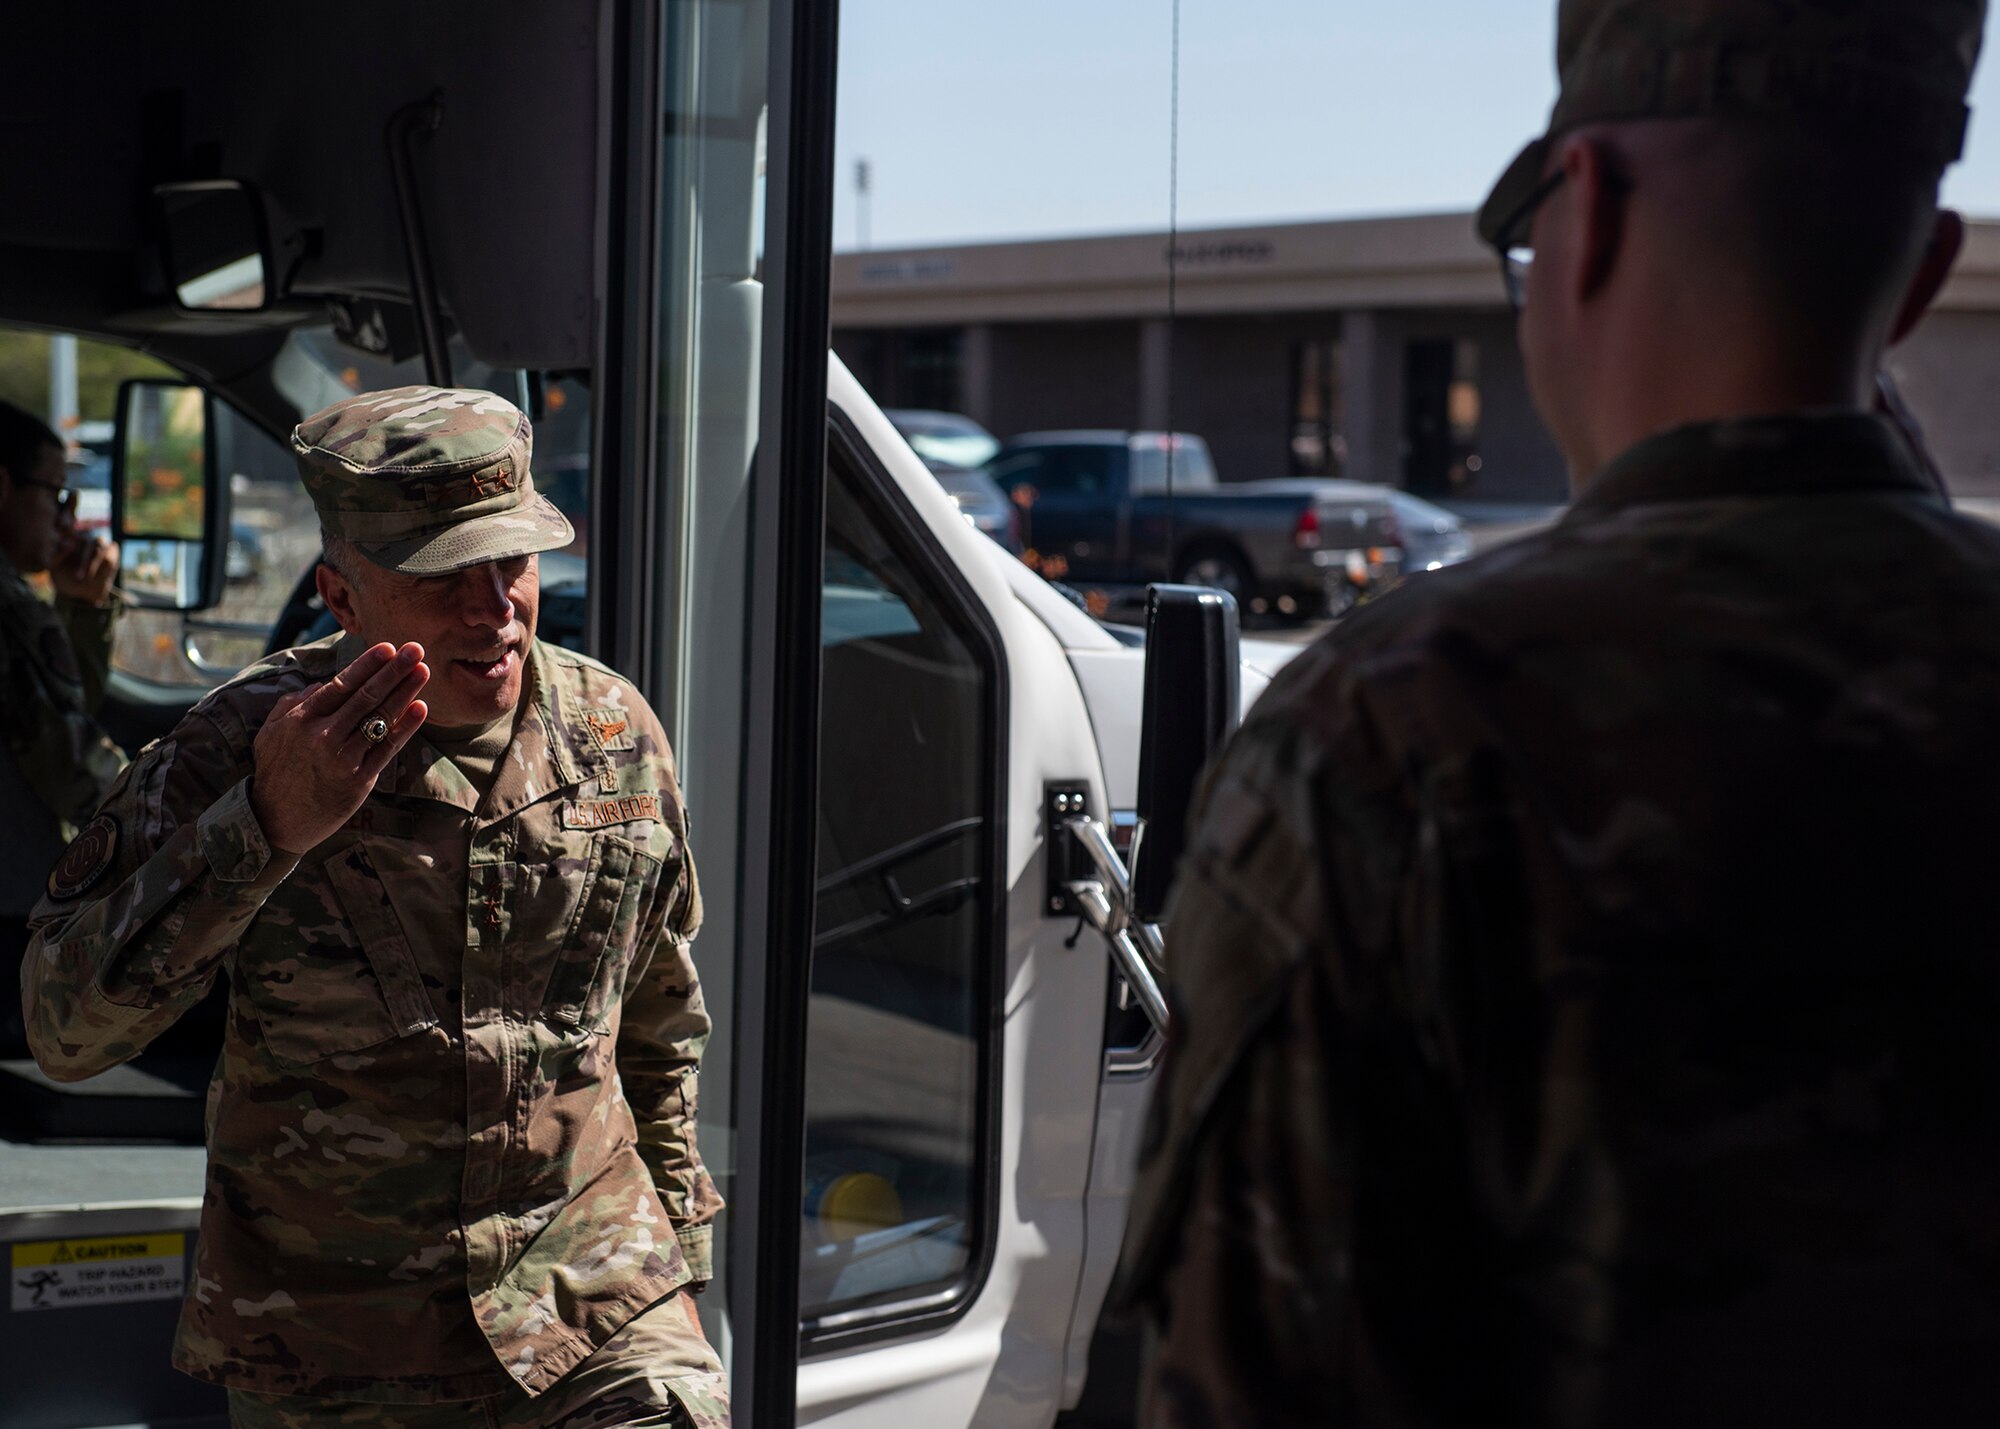 Lt. Gen. Robert Miller, U.S. Air Force and U.S. Space Force surgeon general, salutes Master Sgt. Zachary Bartlett, 99th Medical Support Squadron